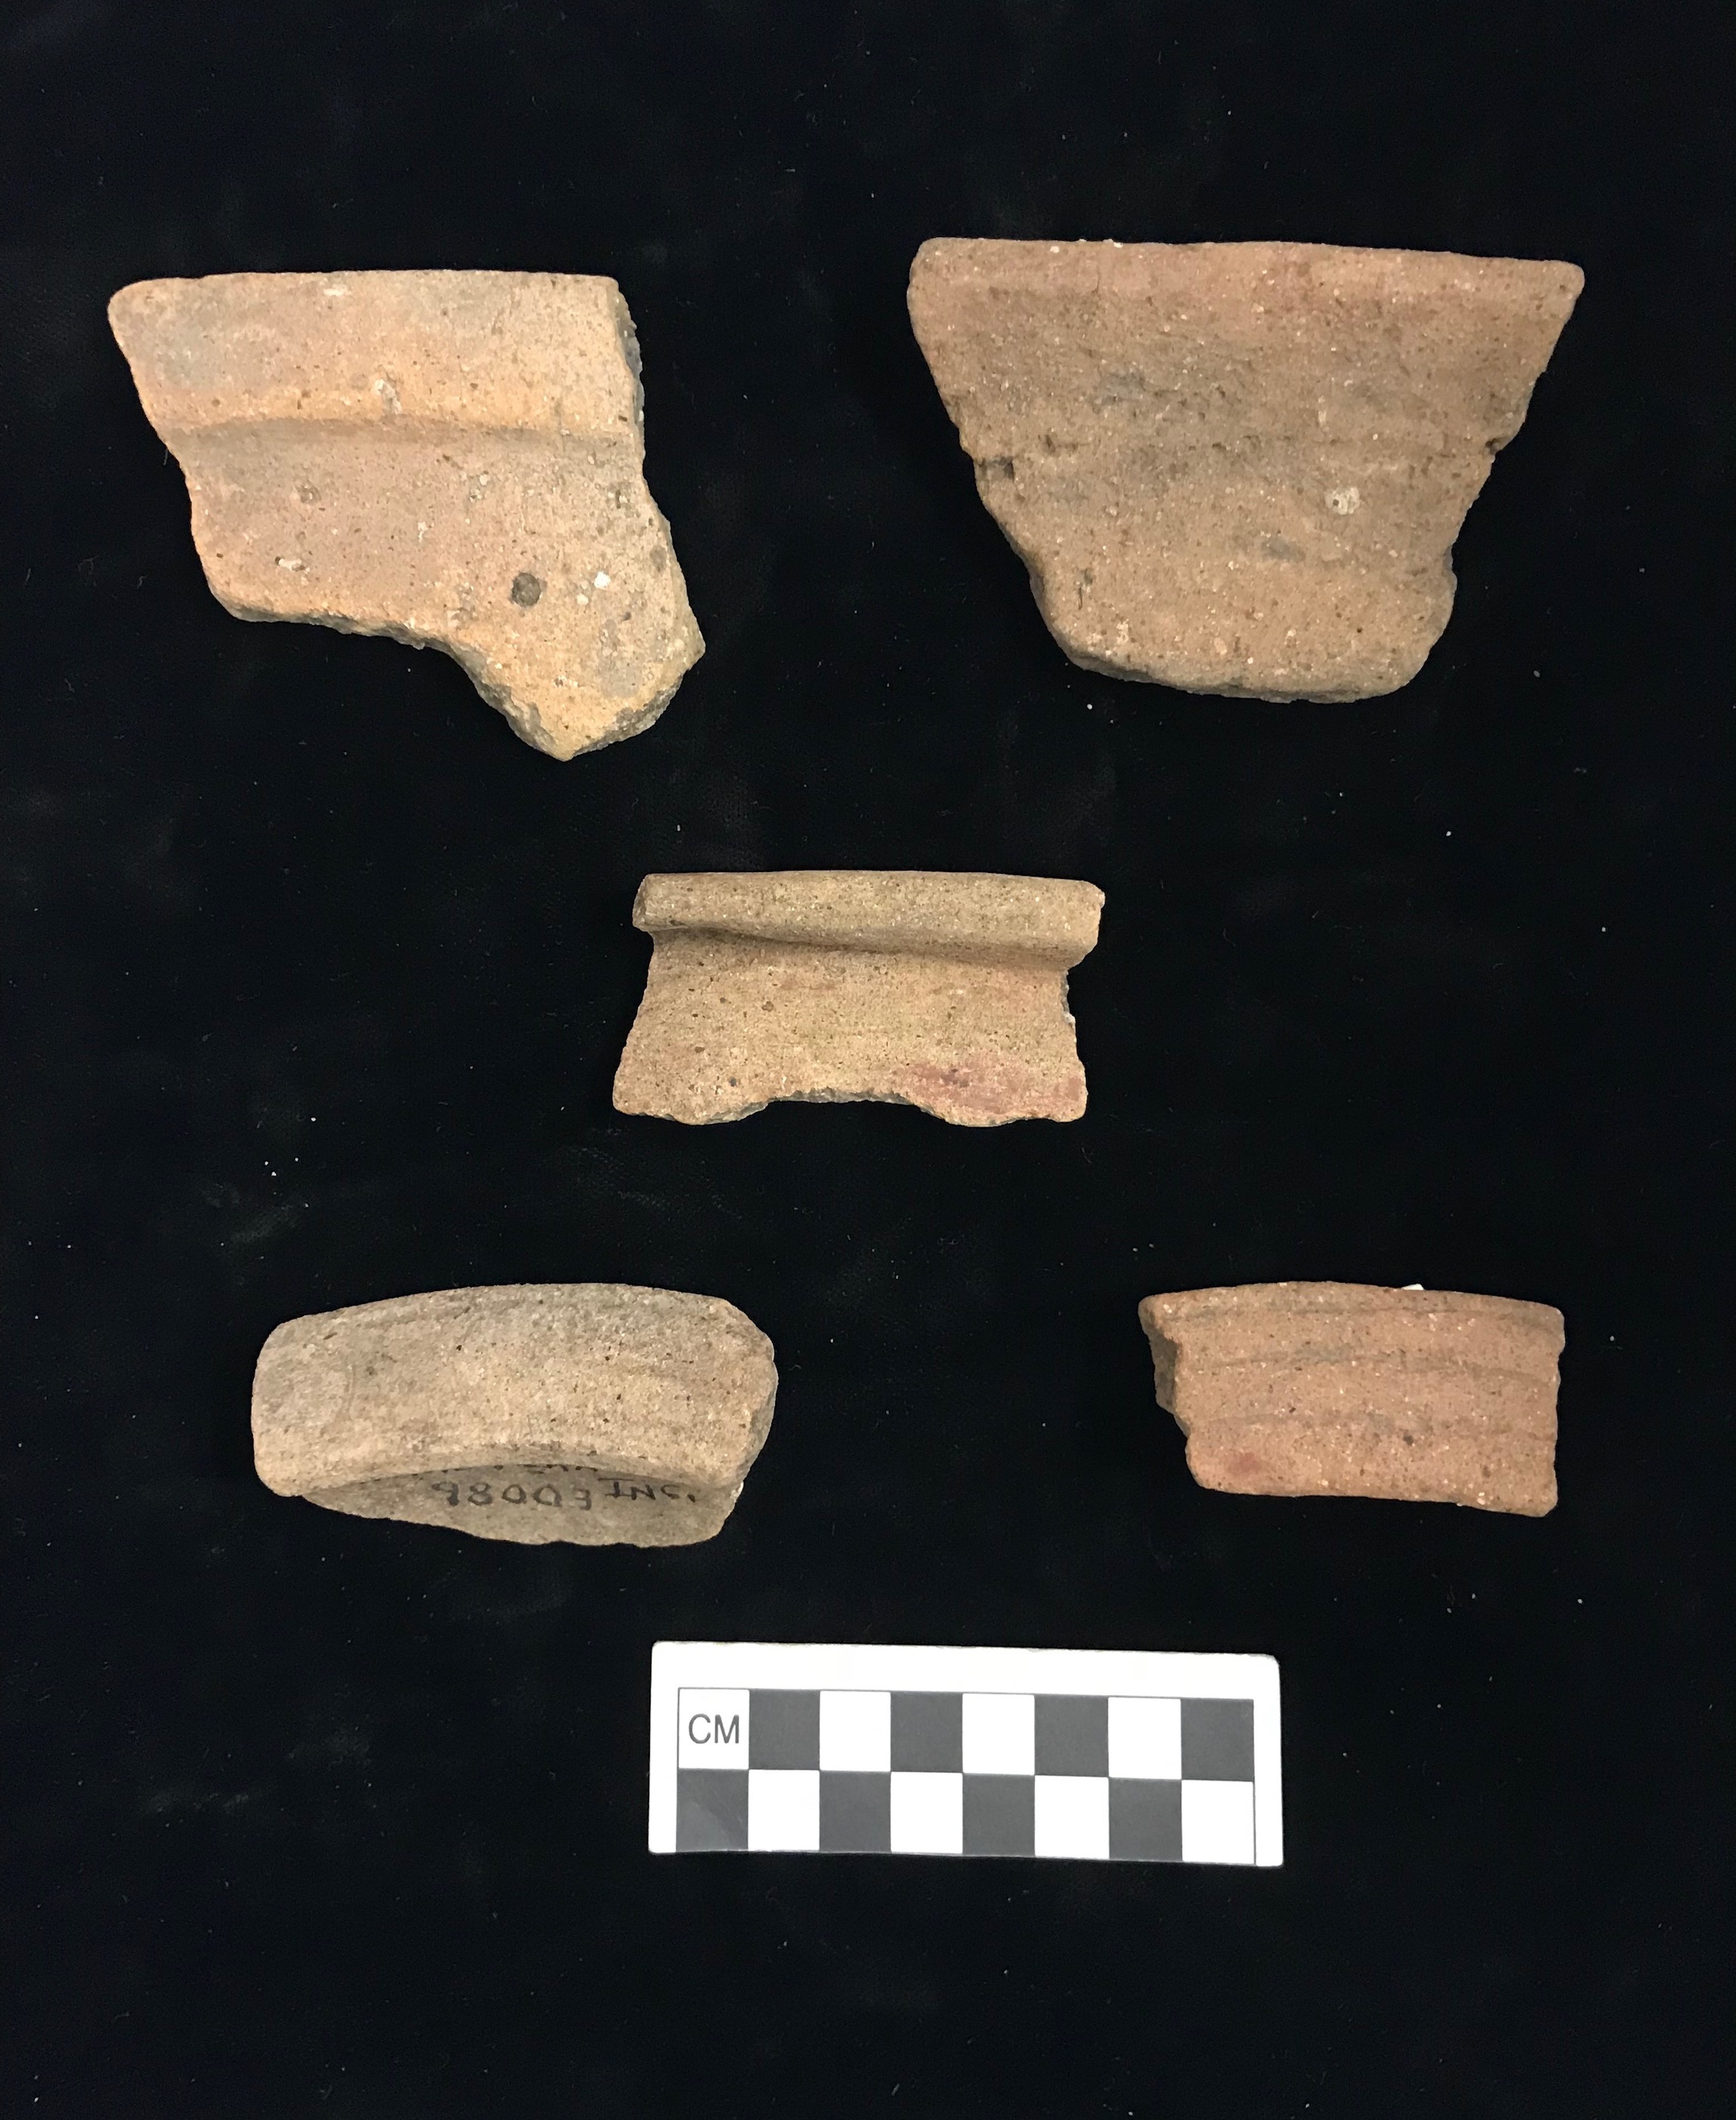 Plate XVI. SALINE FLANGED AND FLANGE INCISED SHERDS. FLMNH Acc. Nos. 98002, 98003, and 98004.